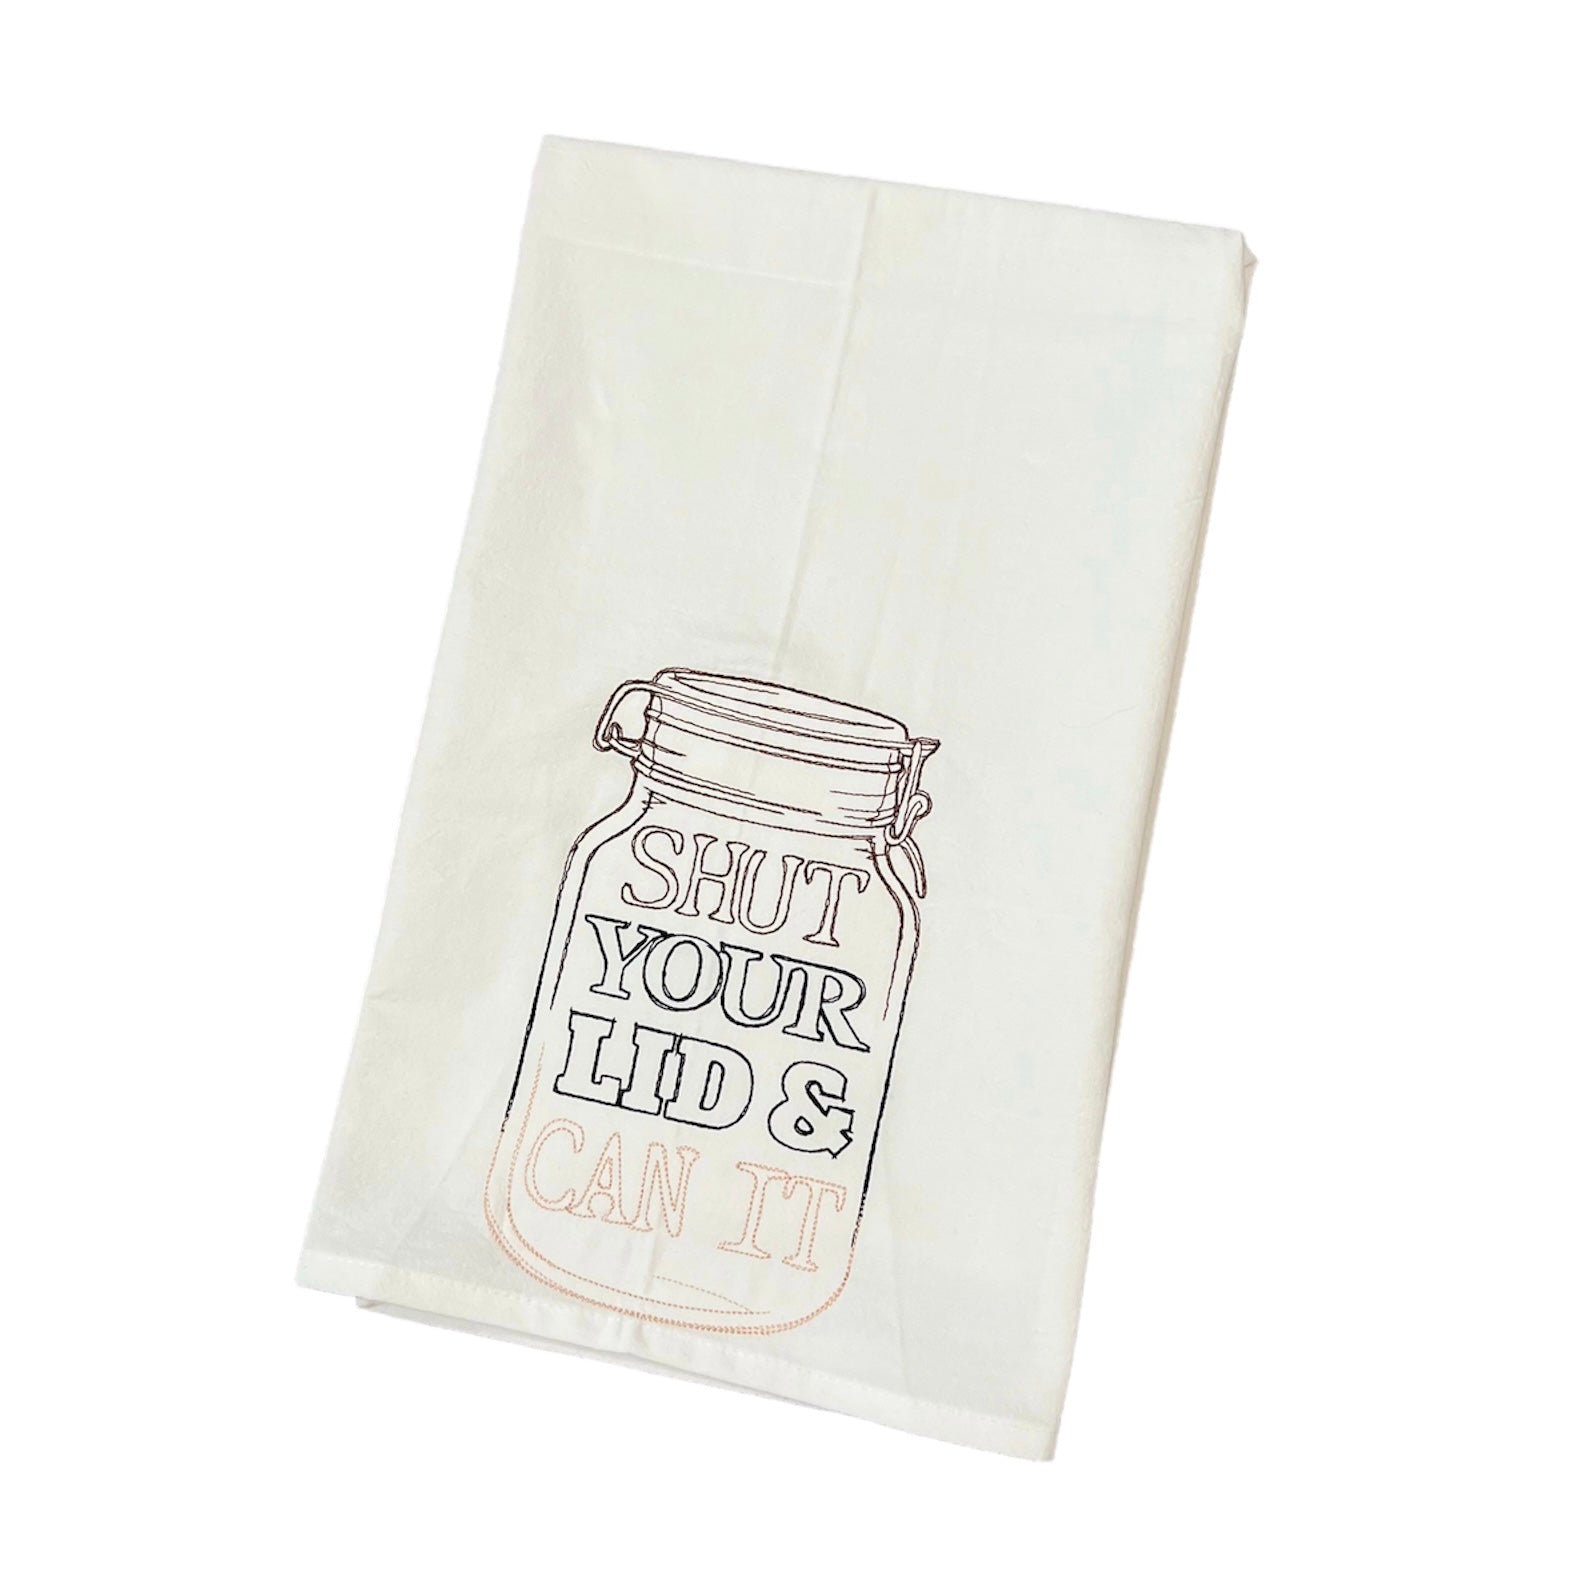 "Shut Your Lid and Can It" Flour Sack Towel